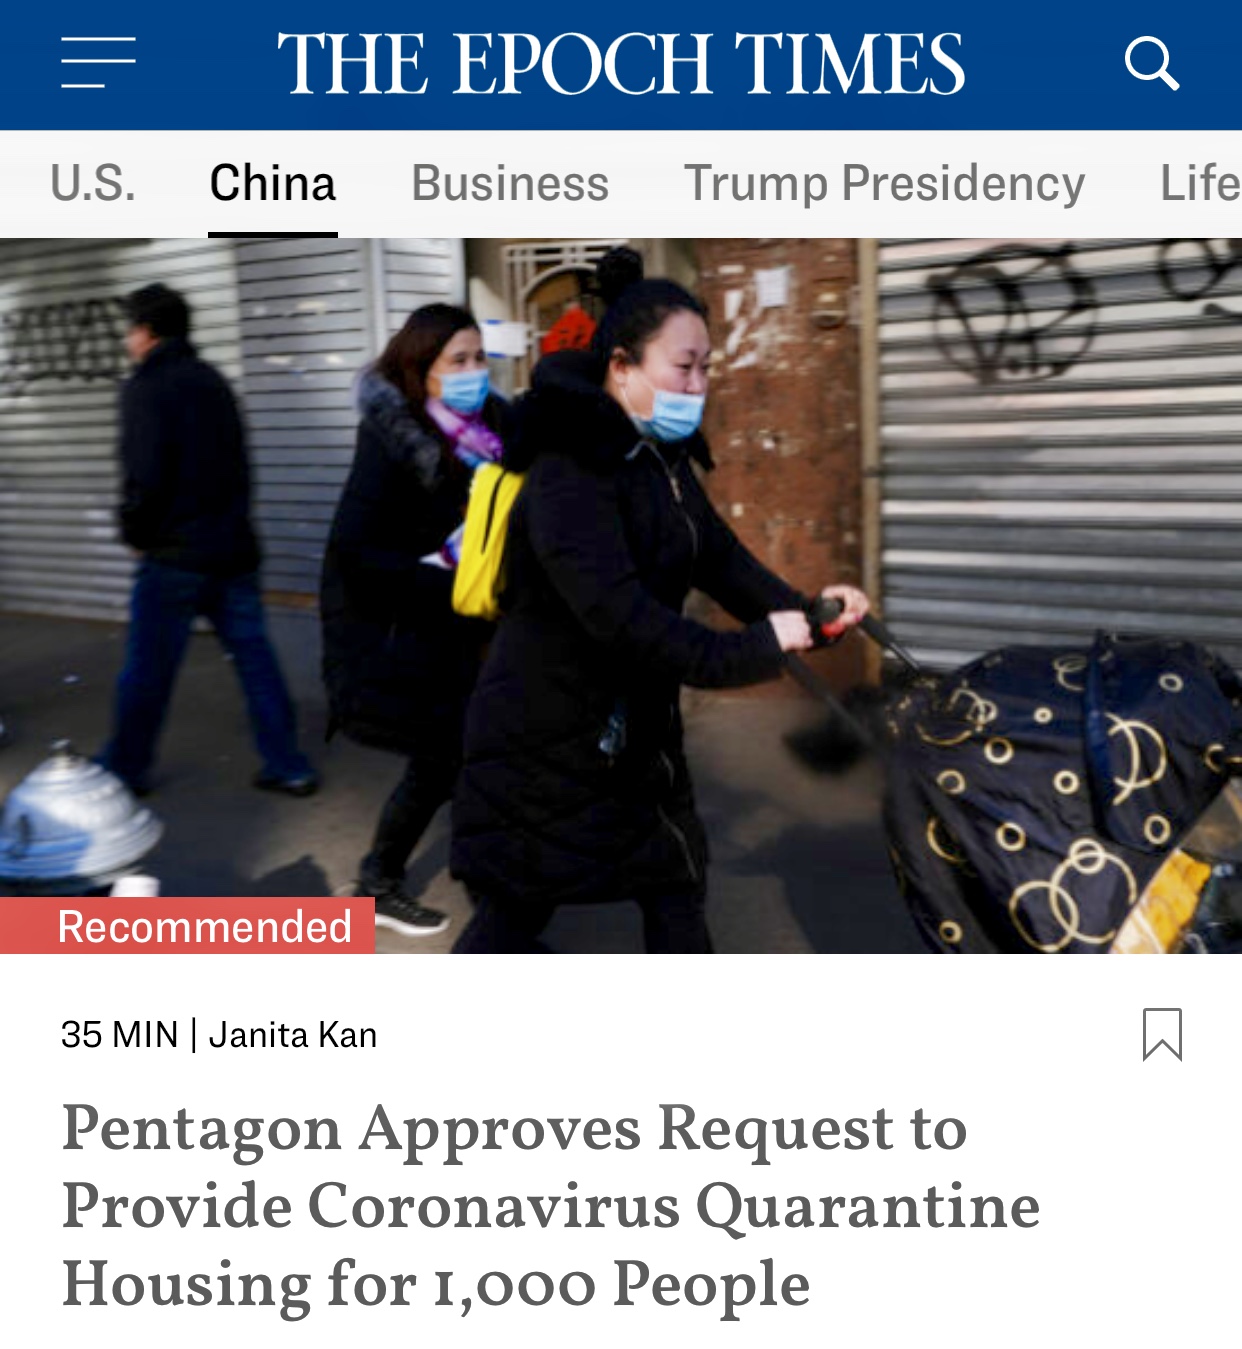 Pentagon Approves Request to Provide Coronavirus Quarantine Housing for 1,000 People